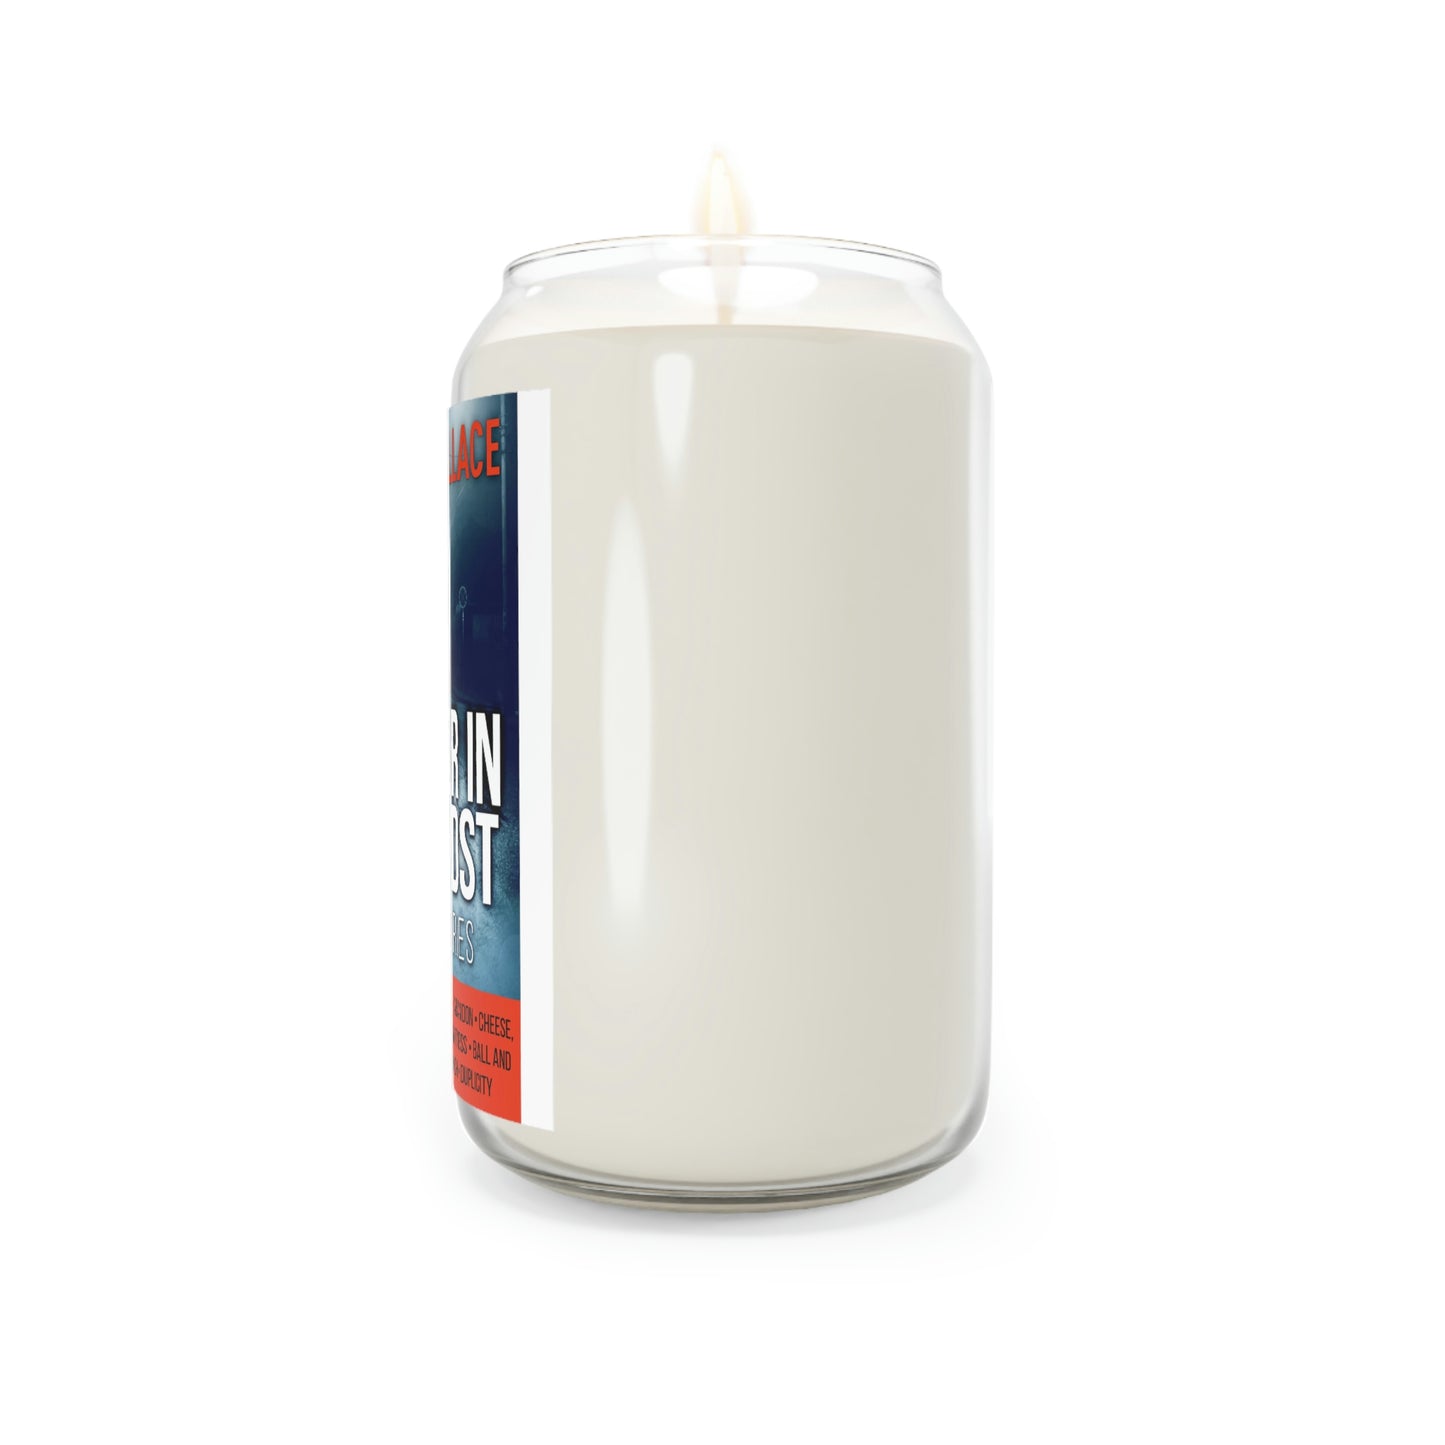 Murder In The Midst - Scented Candle